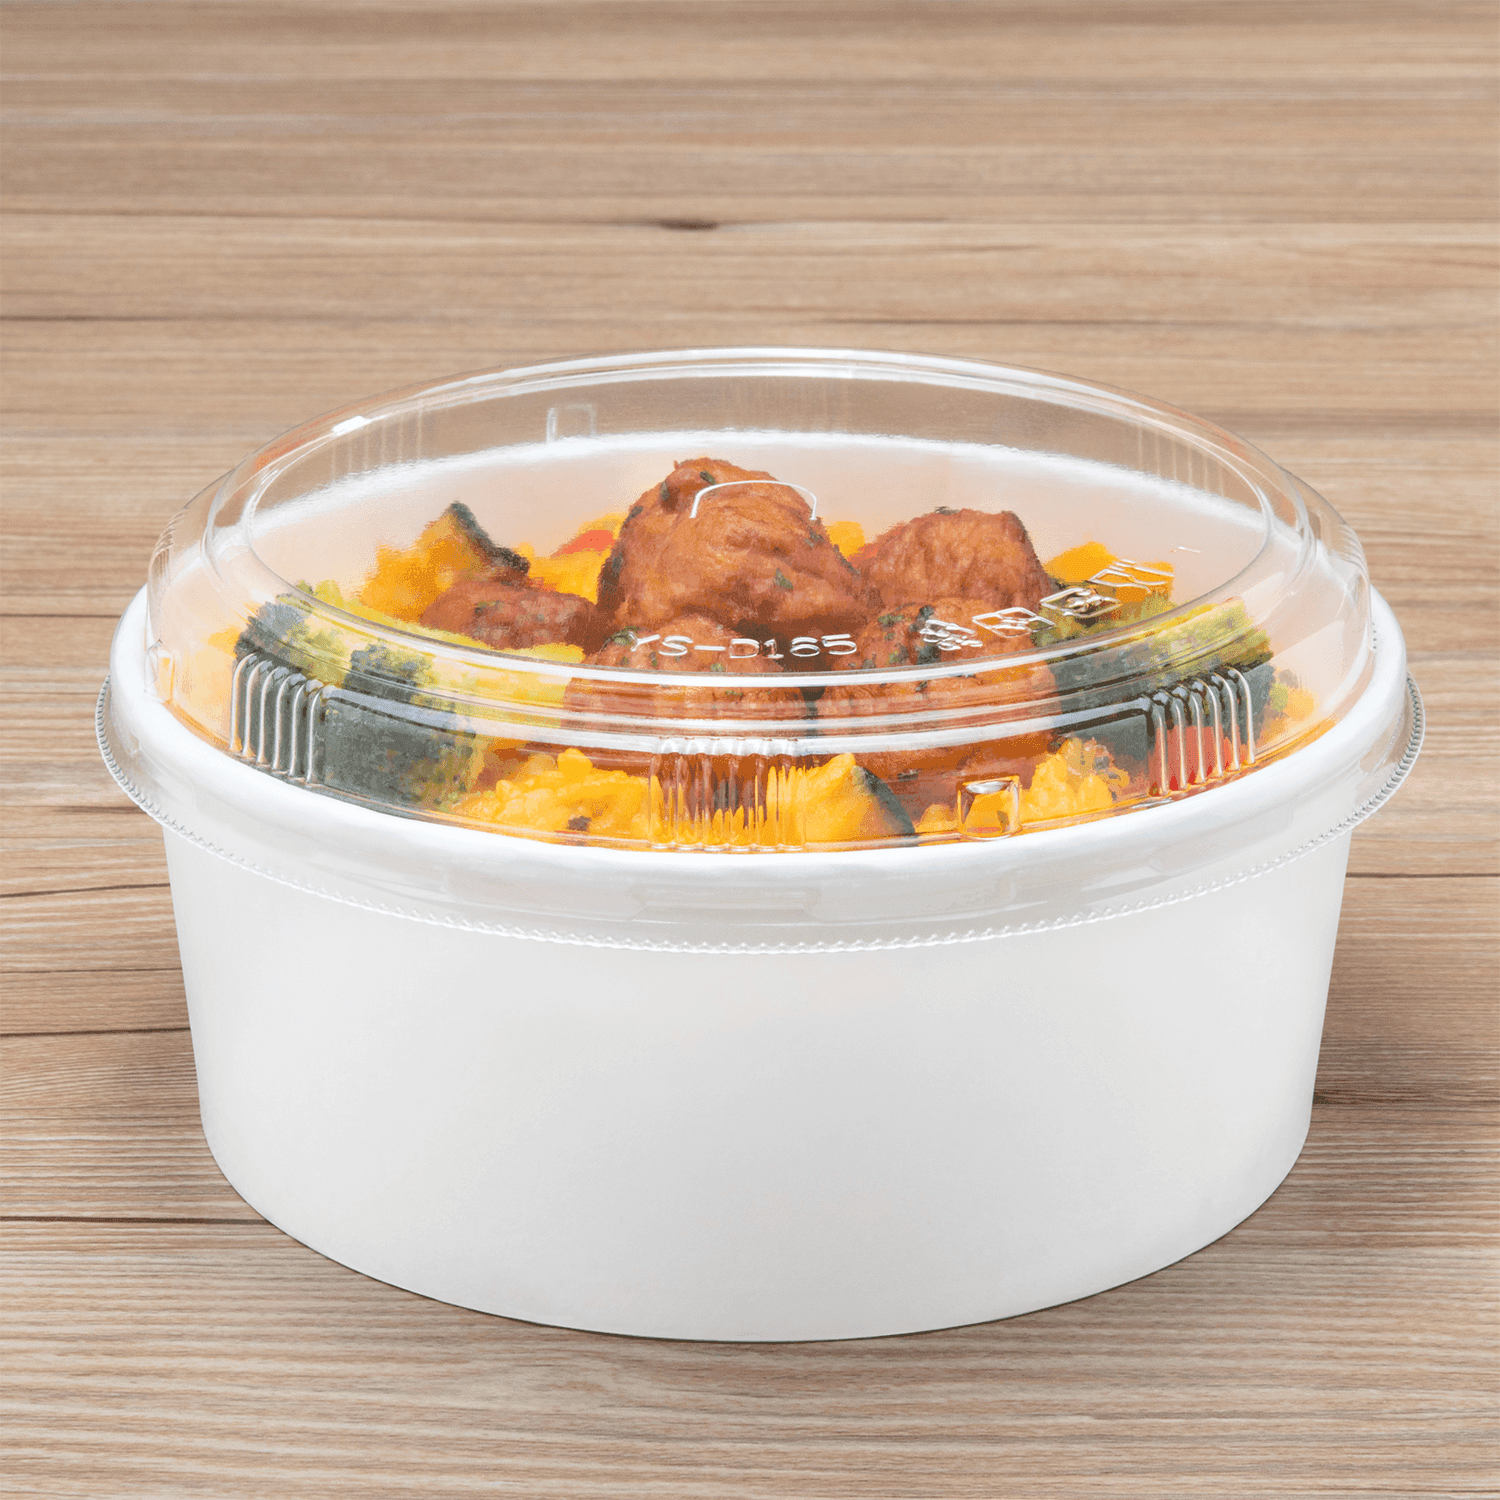 White Karat 32oz Paper Short Buckets with chicken and rice inside and lid on top